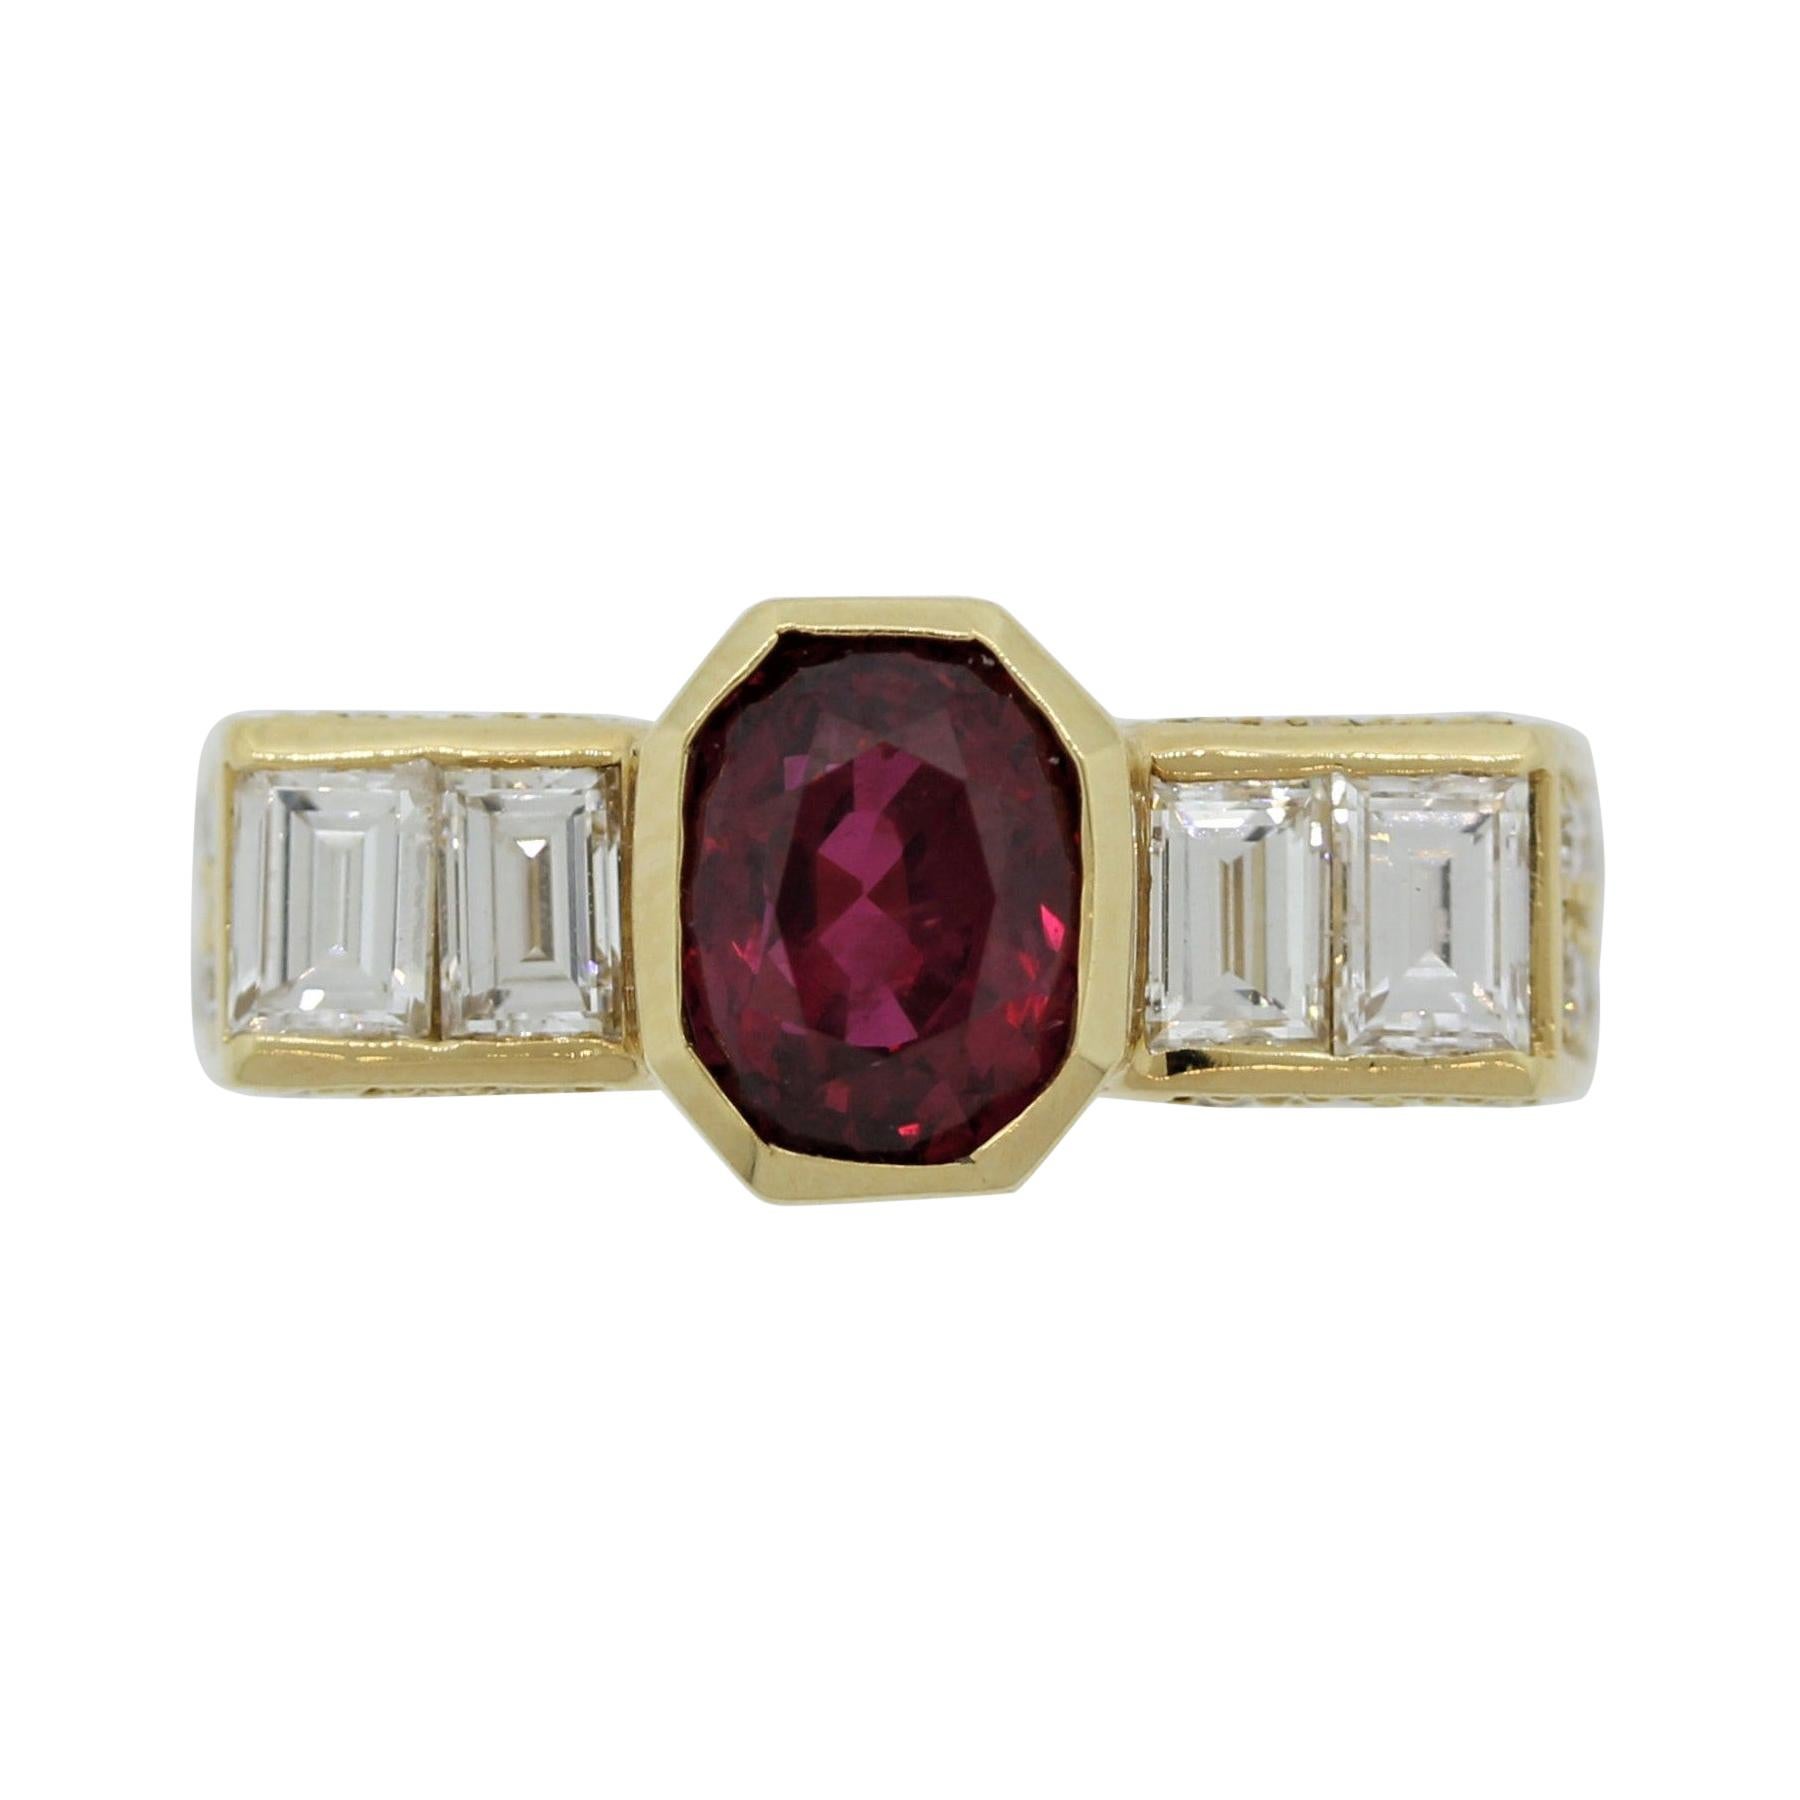 2.10 Carat Unheated Ruby Diamond Gold Ring, AIGS Certified